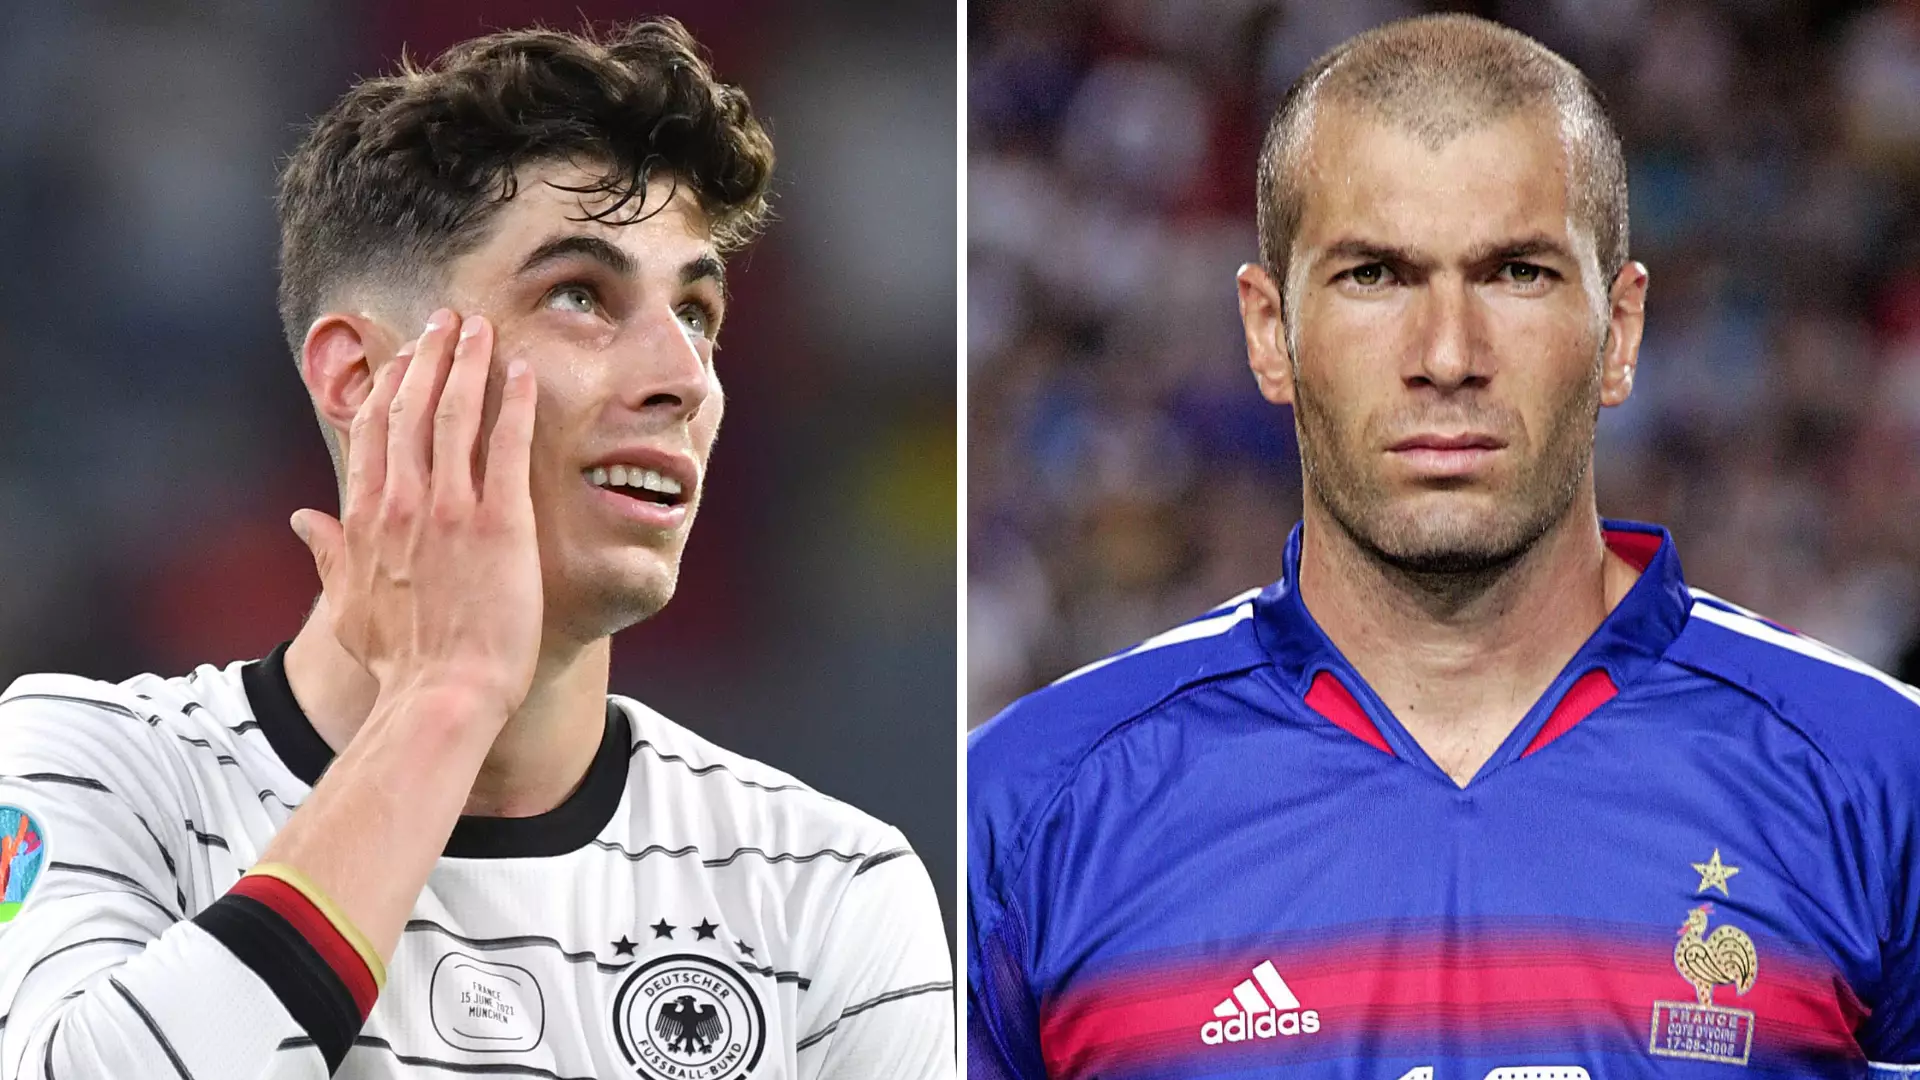 Chelsea Star Kai Havertz Compared To Zinedine Zidane In 'Terms Of Skills, Technique And Overview'